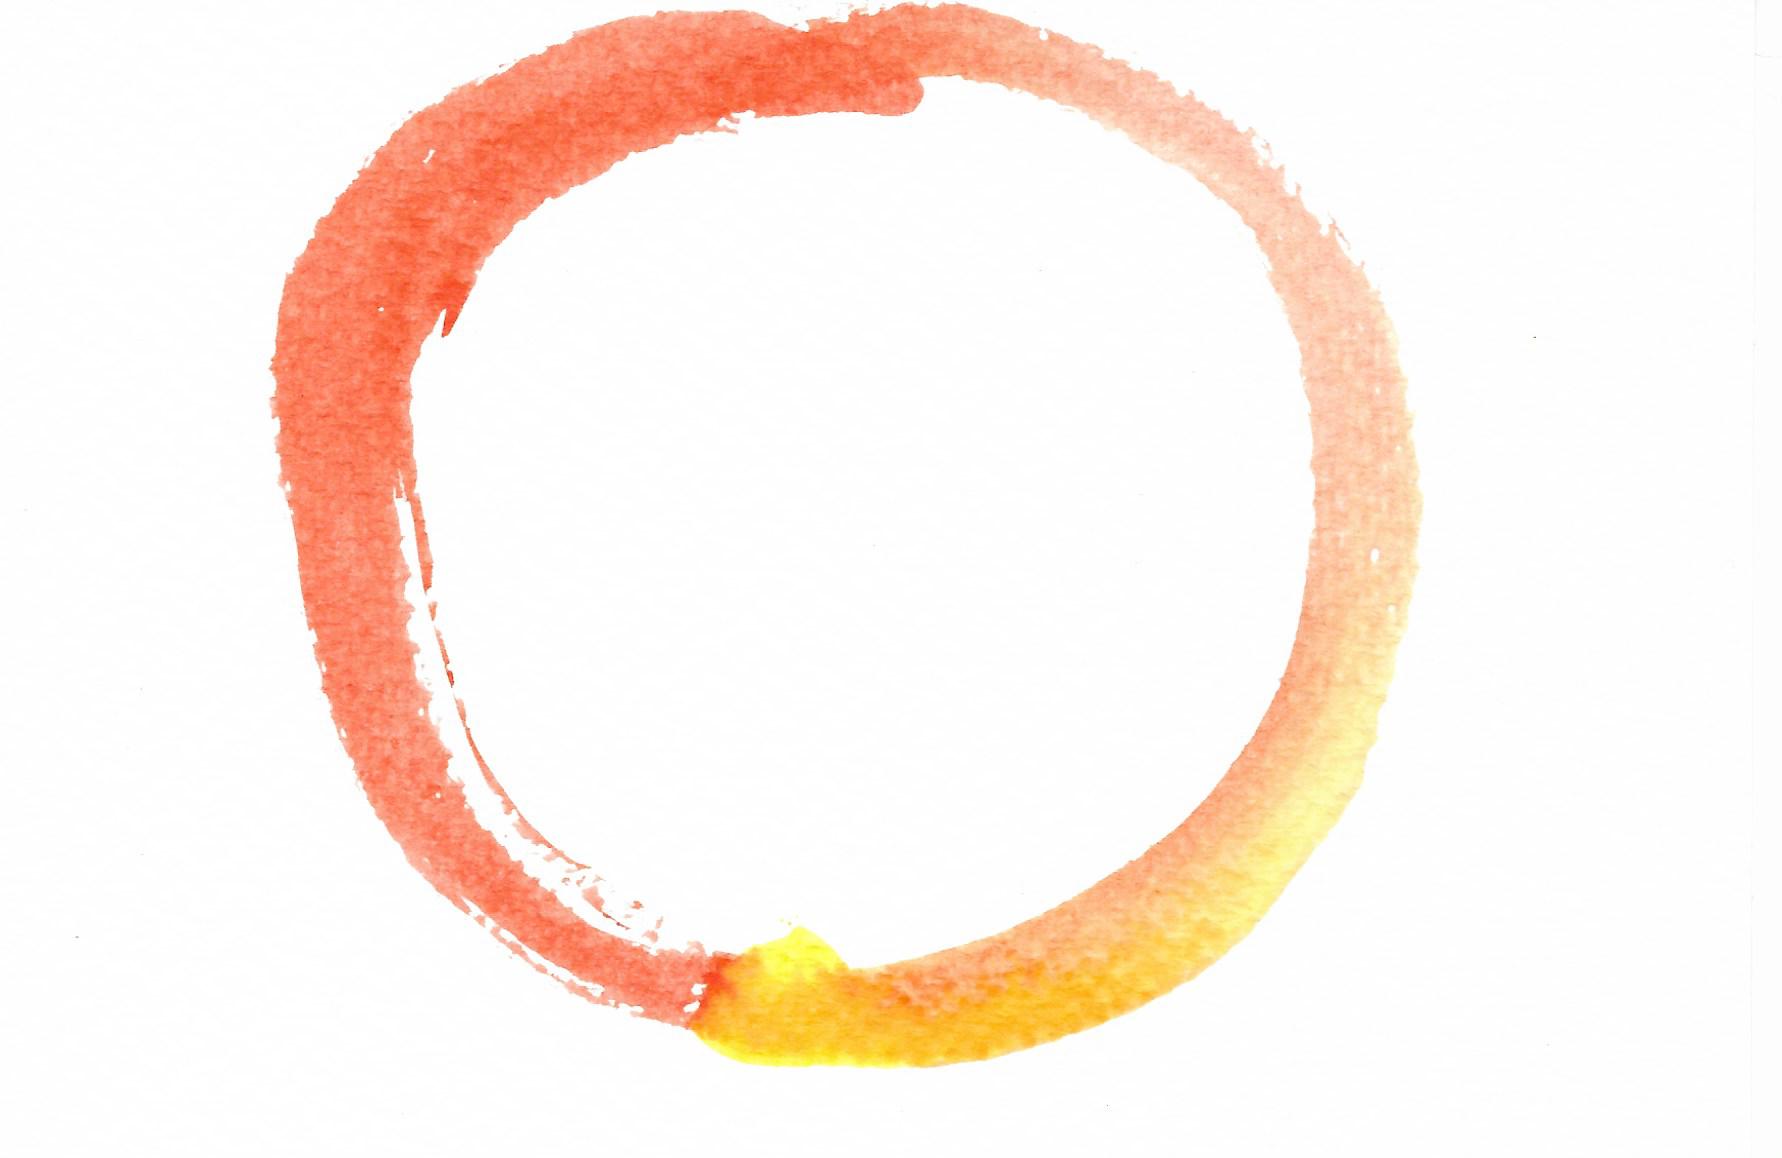 An Enso circle (ink painted on watercolour paper) by Adam Westbrook